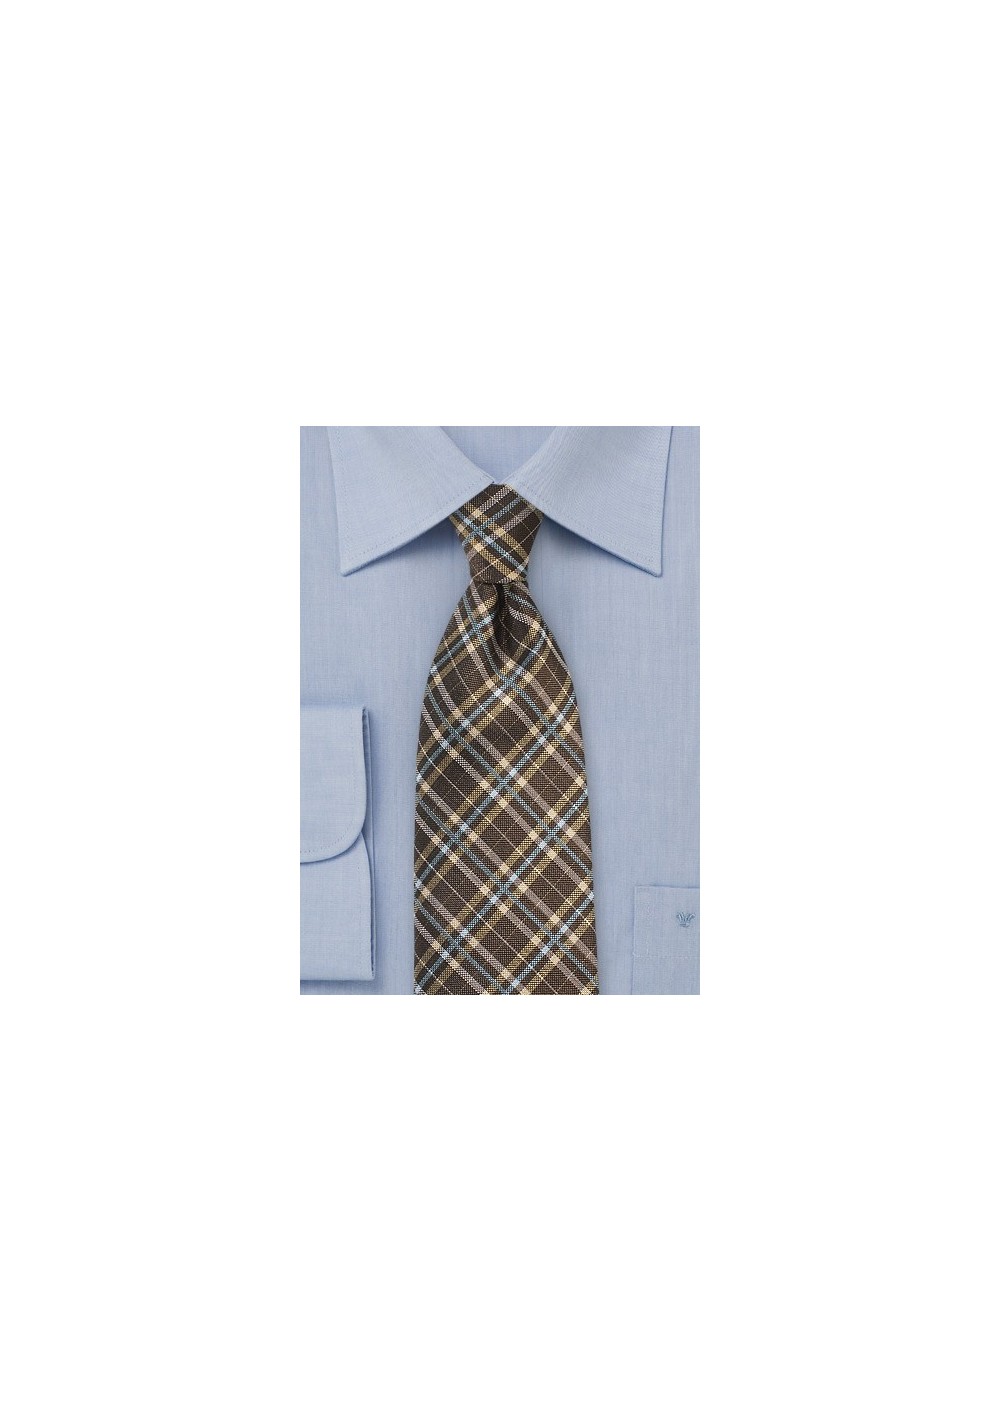 Brown Tartan Tie with Gold and Light Blue